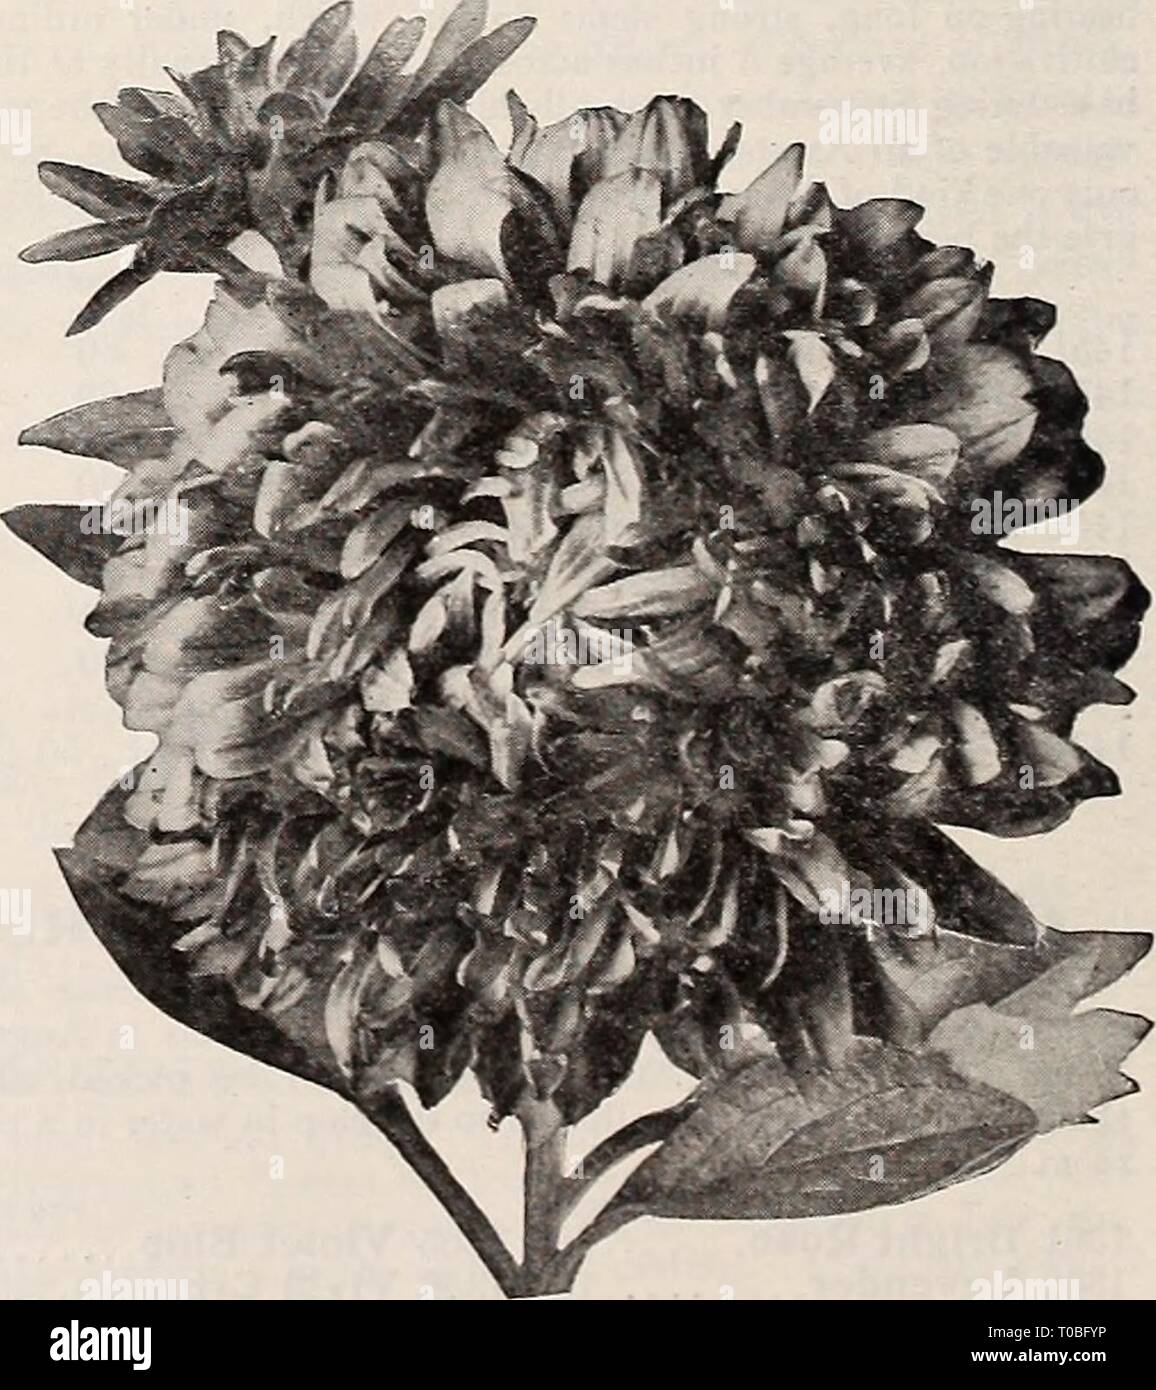 Dreer's garden book 1921 (1921) Dreer's garden book 1921 dreersgardenbook1921henr Year: 1921  KoYAL Aster ROYAL ASTERS A recently developed type that might briefly be described as an early flowering form of our Superb Late Branching variety, having all the good qualities of the latter, but coming into bloom in July or early August, and lasting in perfect condition for a long time. The habit of the plants and their free-flower- ing make them very desirable for beds or borders, while their long-stemmed flowers are ideal for cutting. The form of the flower is well shown in the illustration. We of Stock Photo